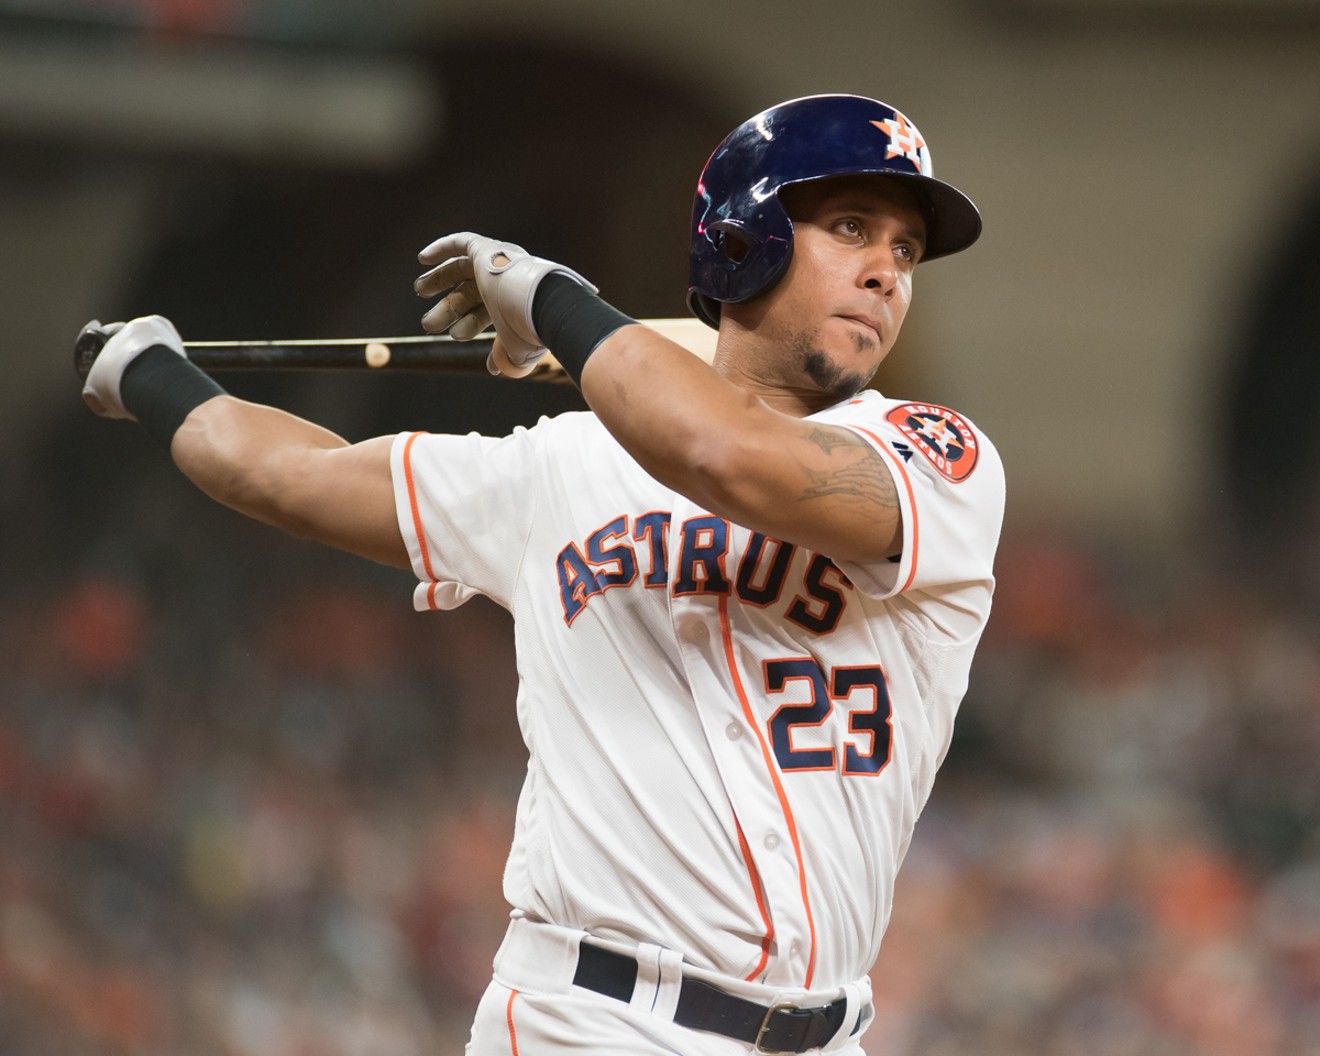 Bringing back outfielder Michael Brantley was one fo James Click's best moves as GM of the Astros in 2021.